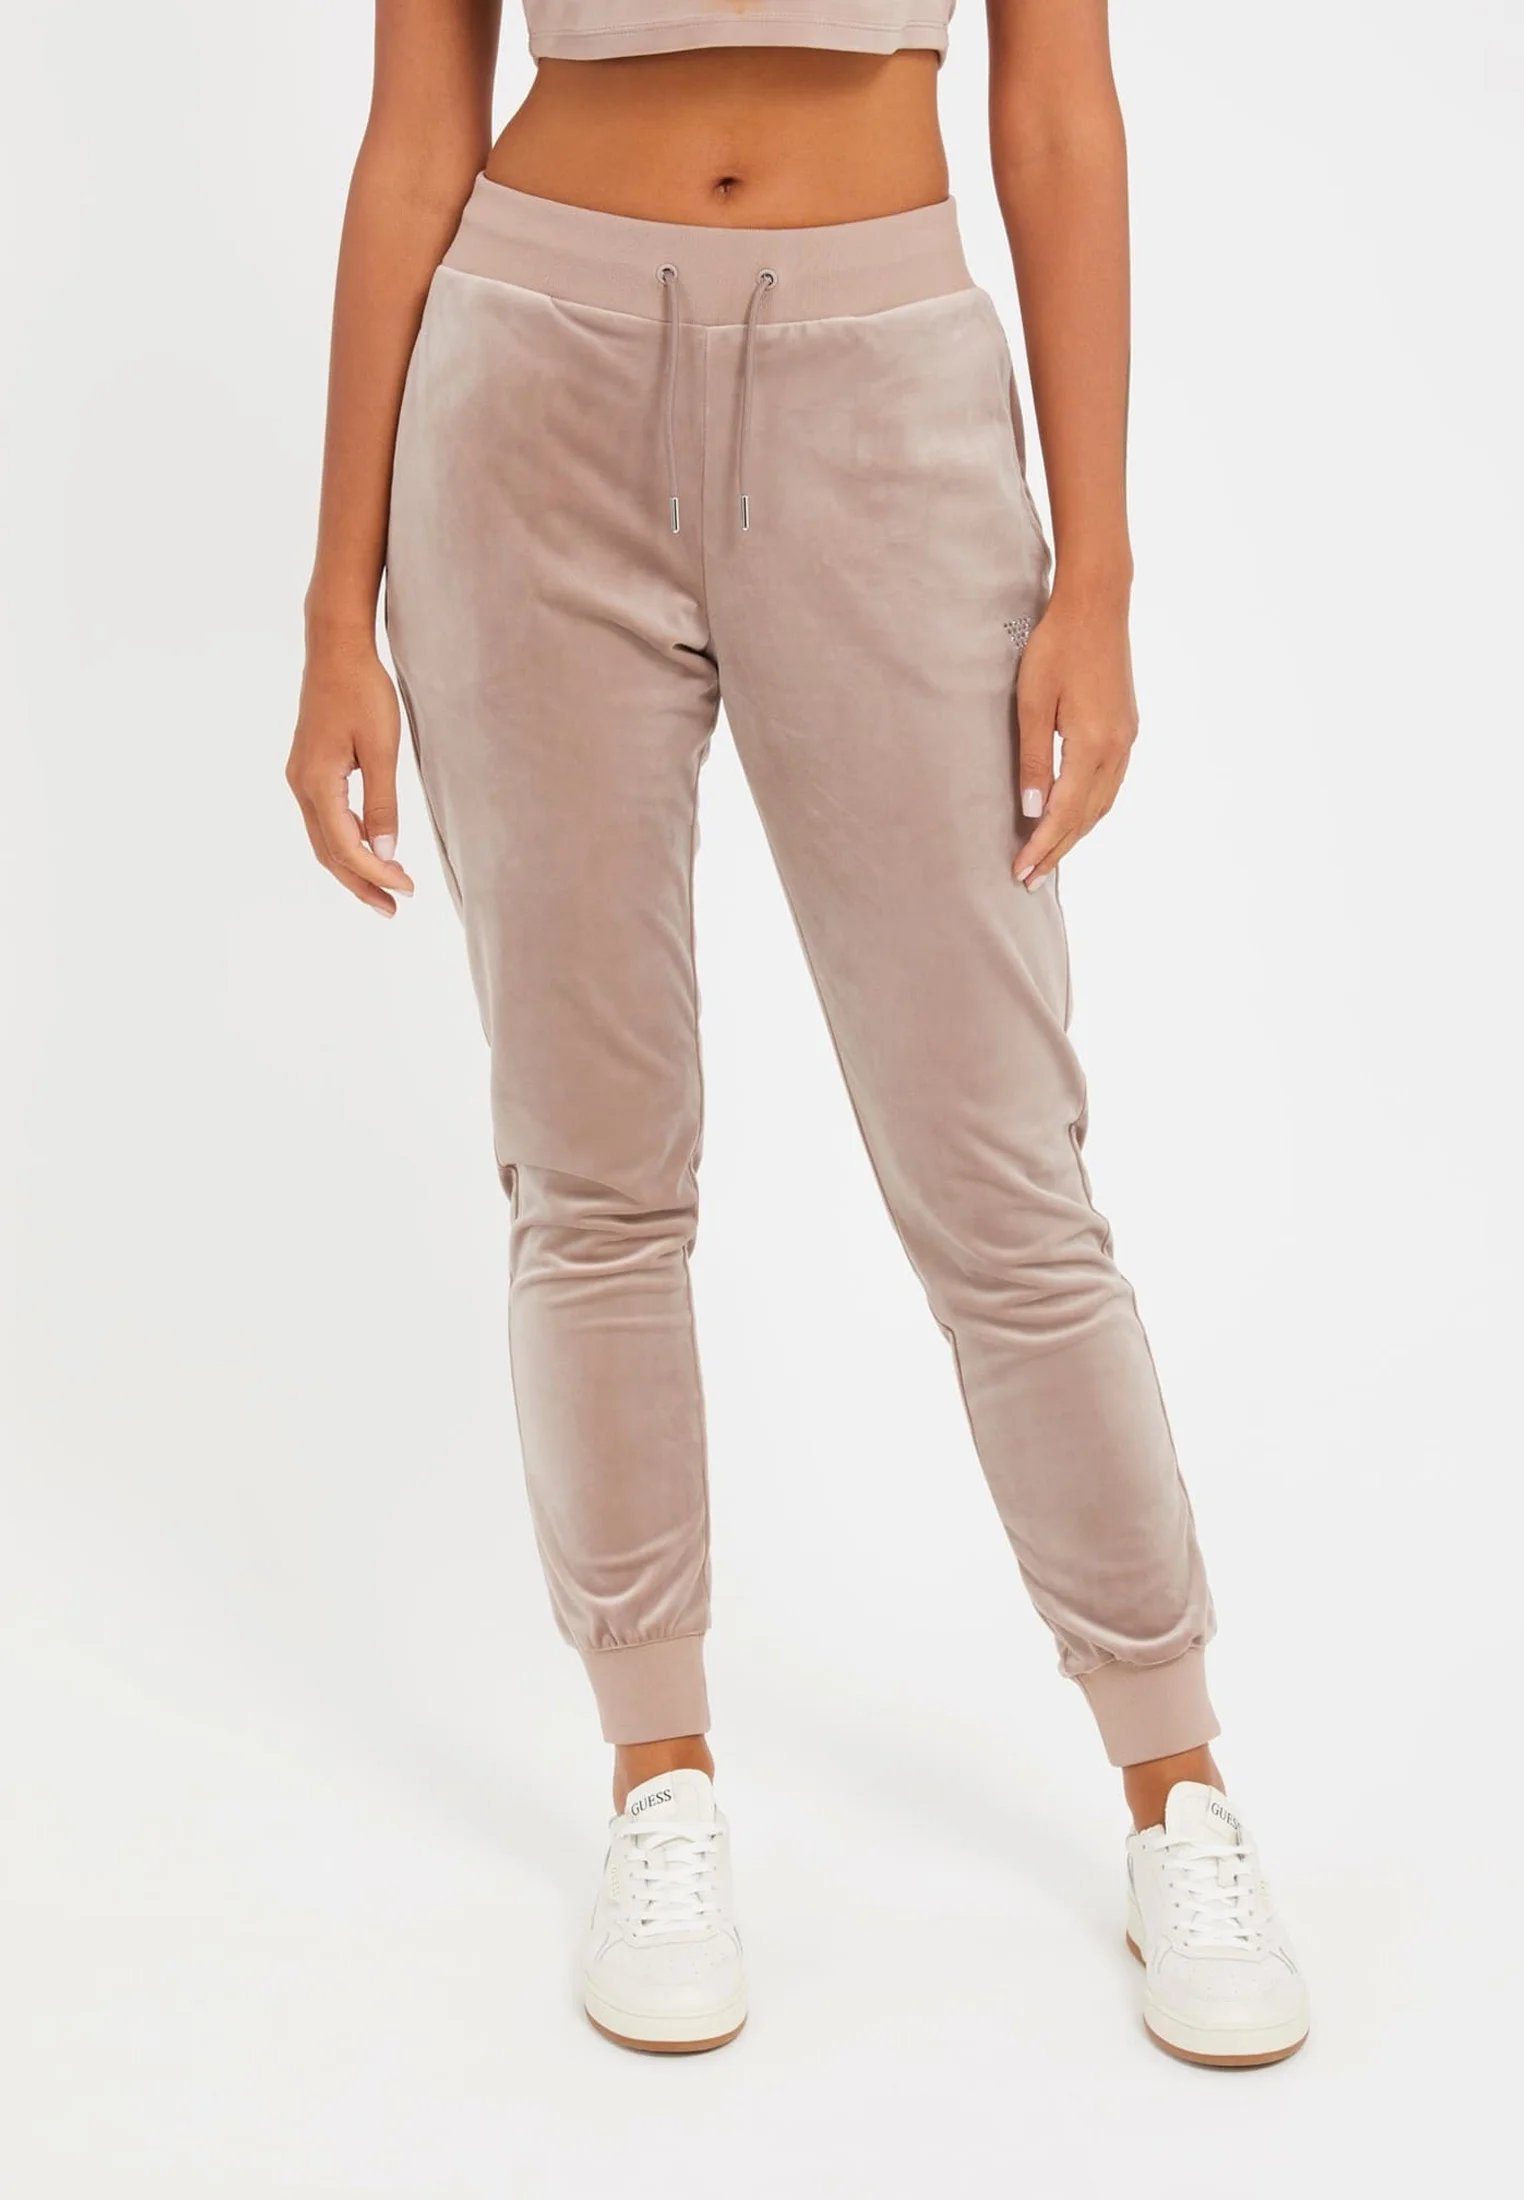 Guess Collection Homewearhose - sportliche Stoffhose - COUTURE JOGGER PANTS